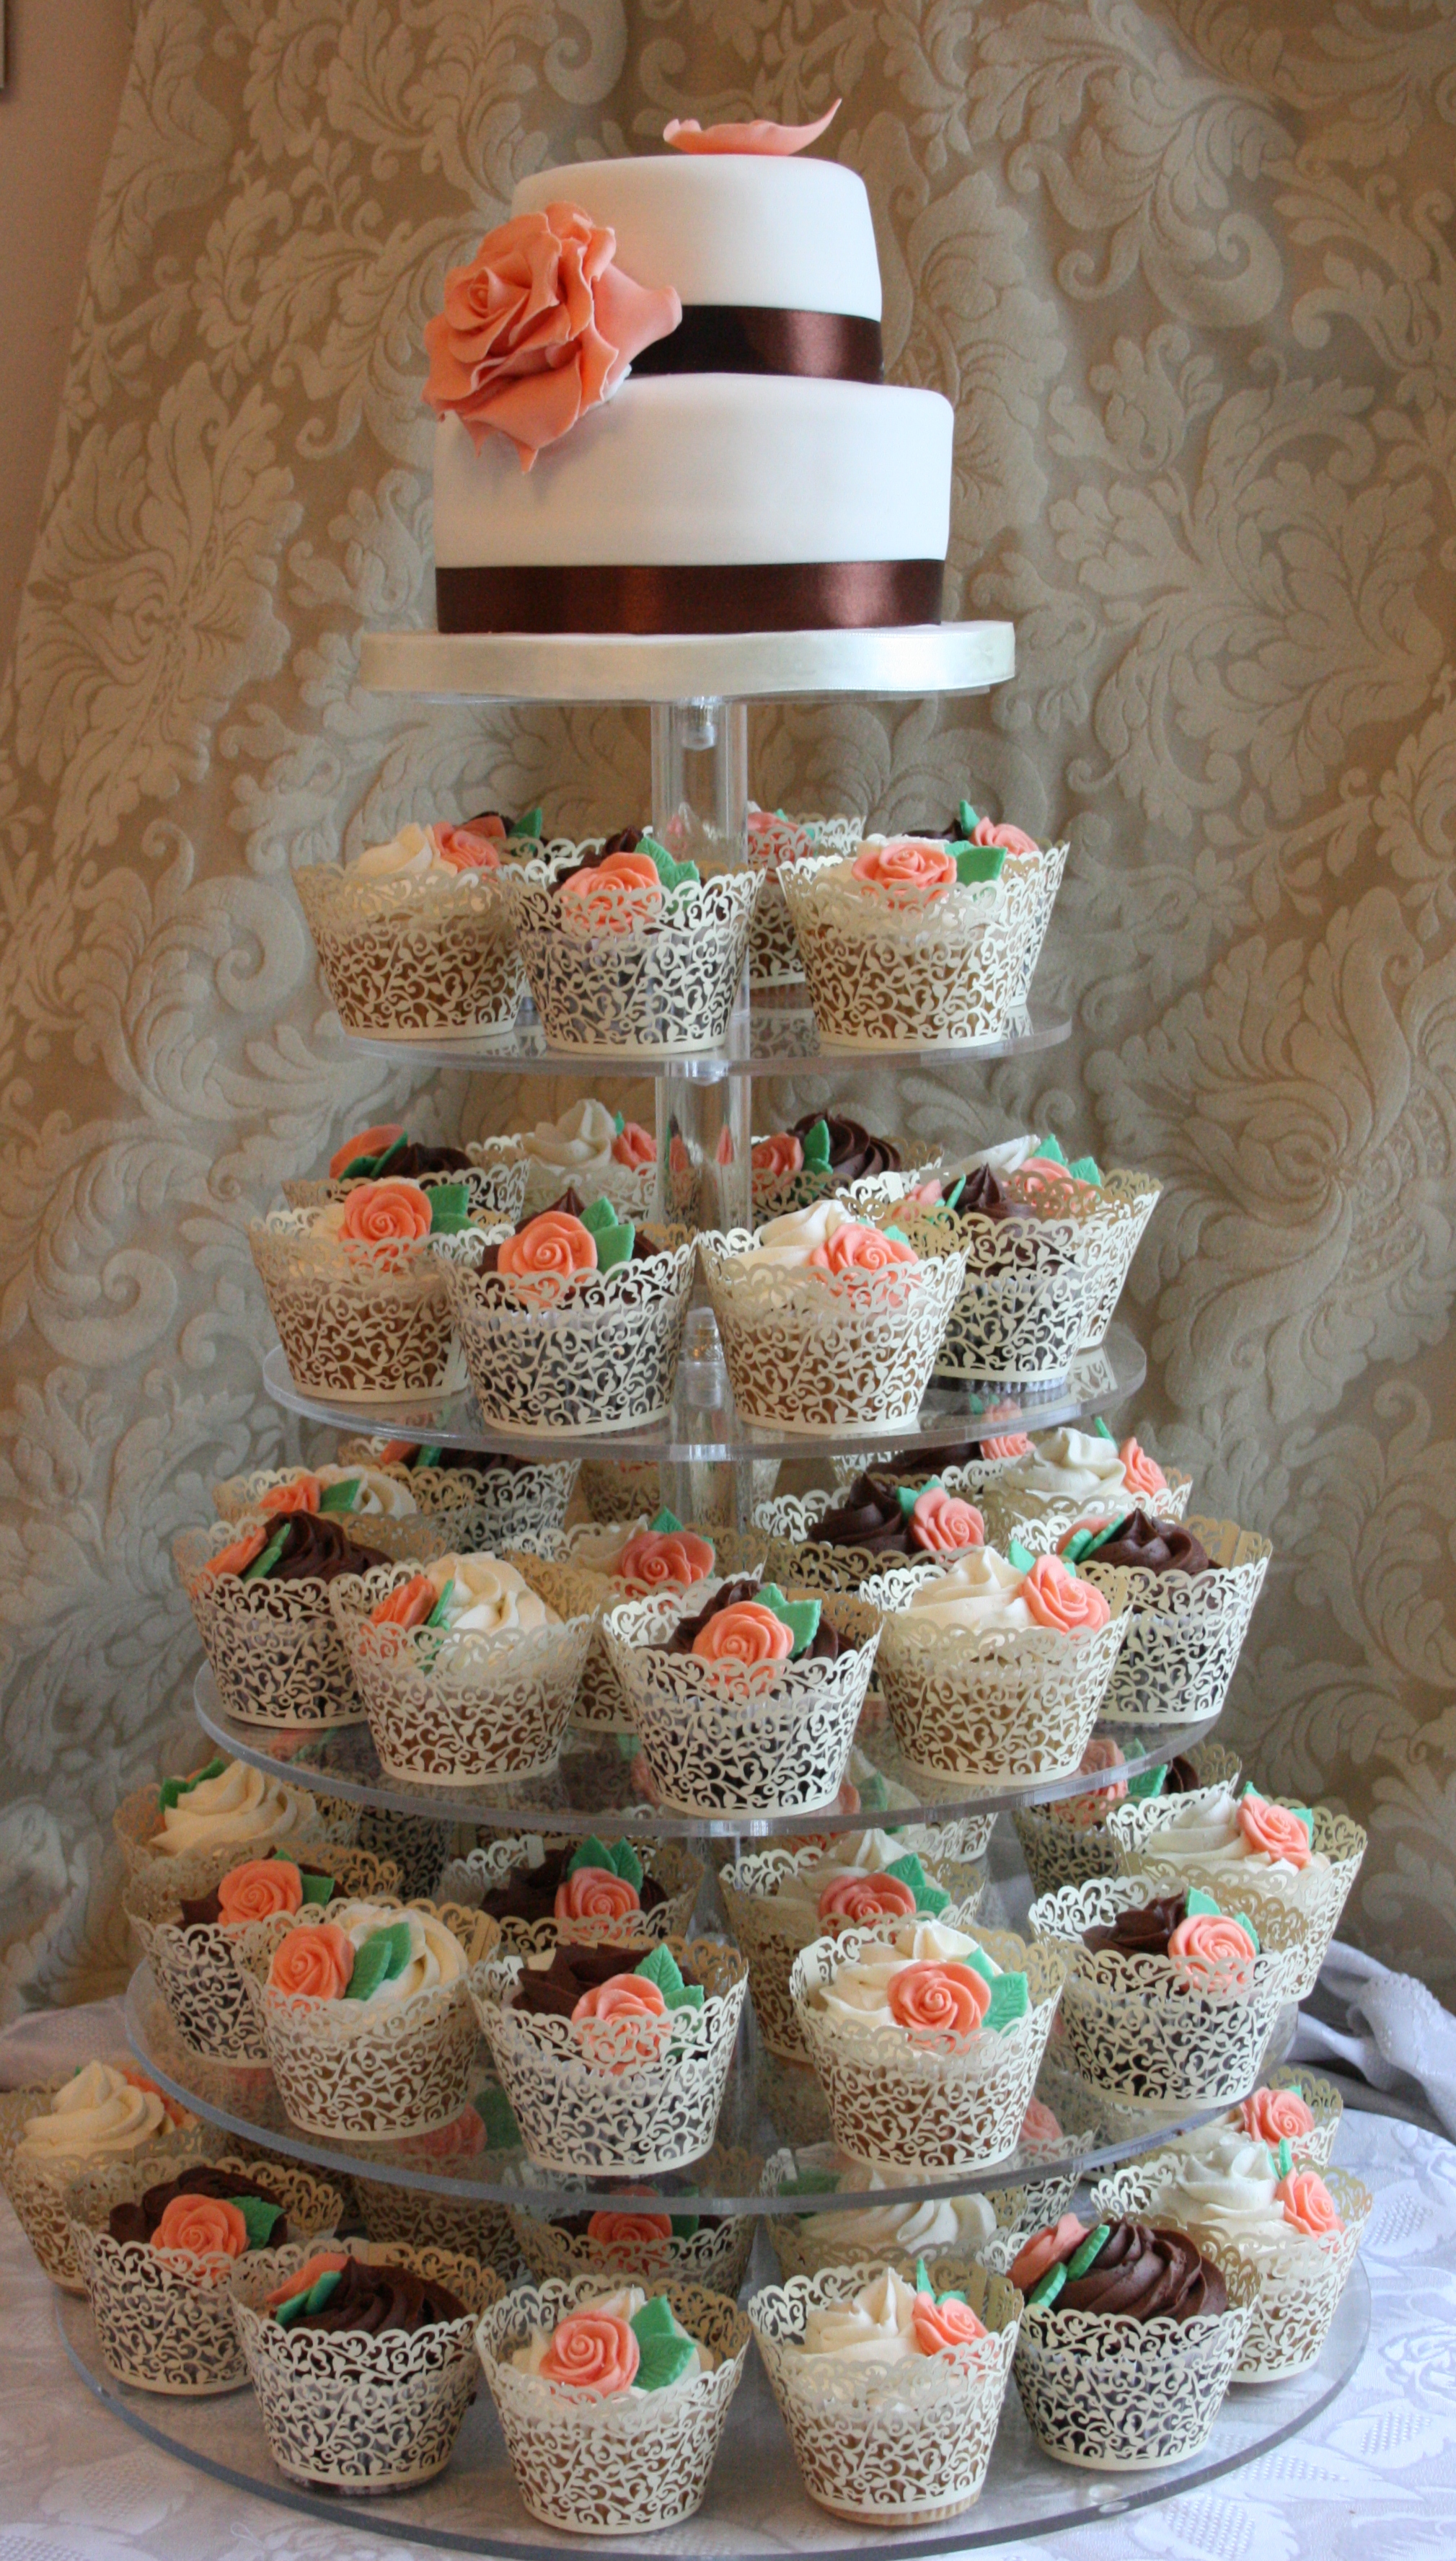 Top 2 Tier Wedding Cake with Cupcakes